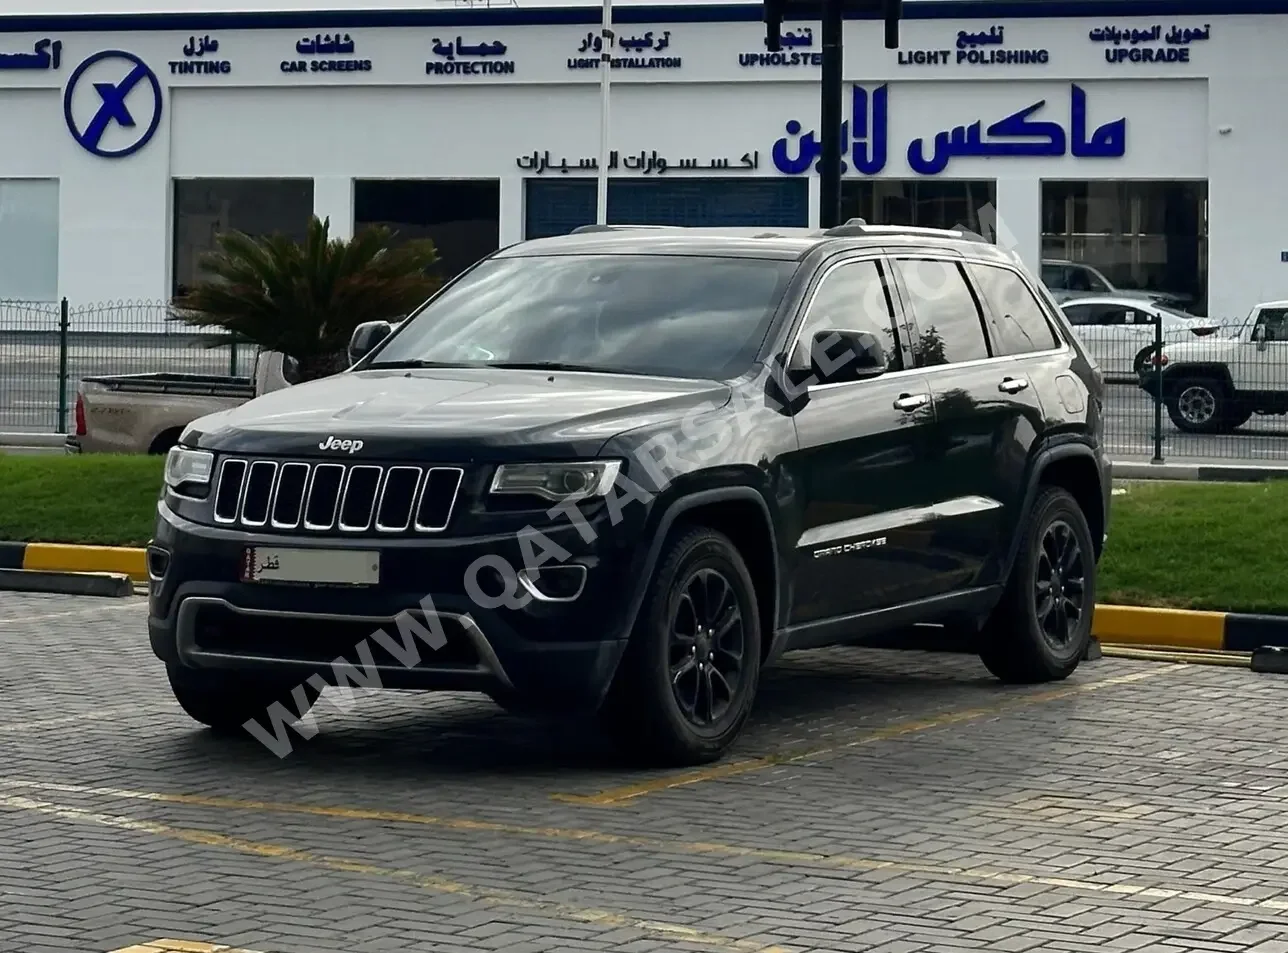 Jeep  Grand Cherokee  Limited  2016  Automatic  220,000 Km  8 Cylinder  Four Wheel Drive (4WD)  SUV  Black